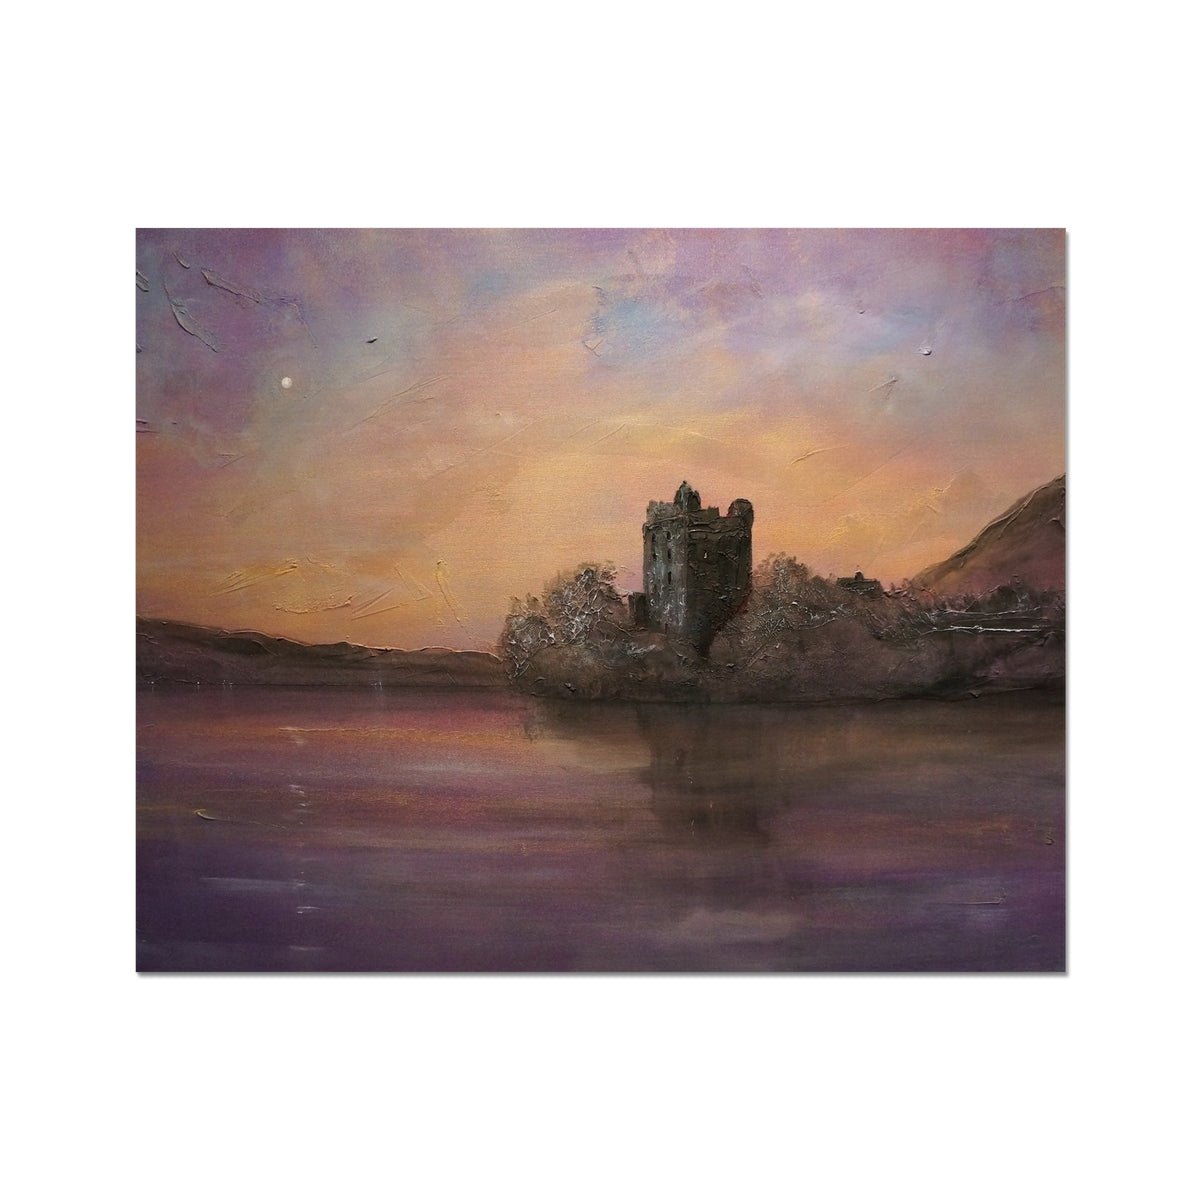 Urquhart Castle Moonlight Painting | Artist Proof Collector Prints From Scotland-Artist Proof Collector Prints-Historic & Iconic Scotland Art Gallery-20"x16"-Paintings, Prints, Homeware, Art Gifts From Scotland By Scottish Artist Kevin Hunter